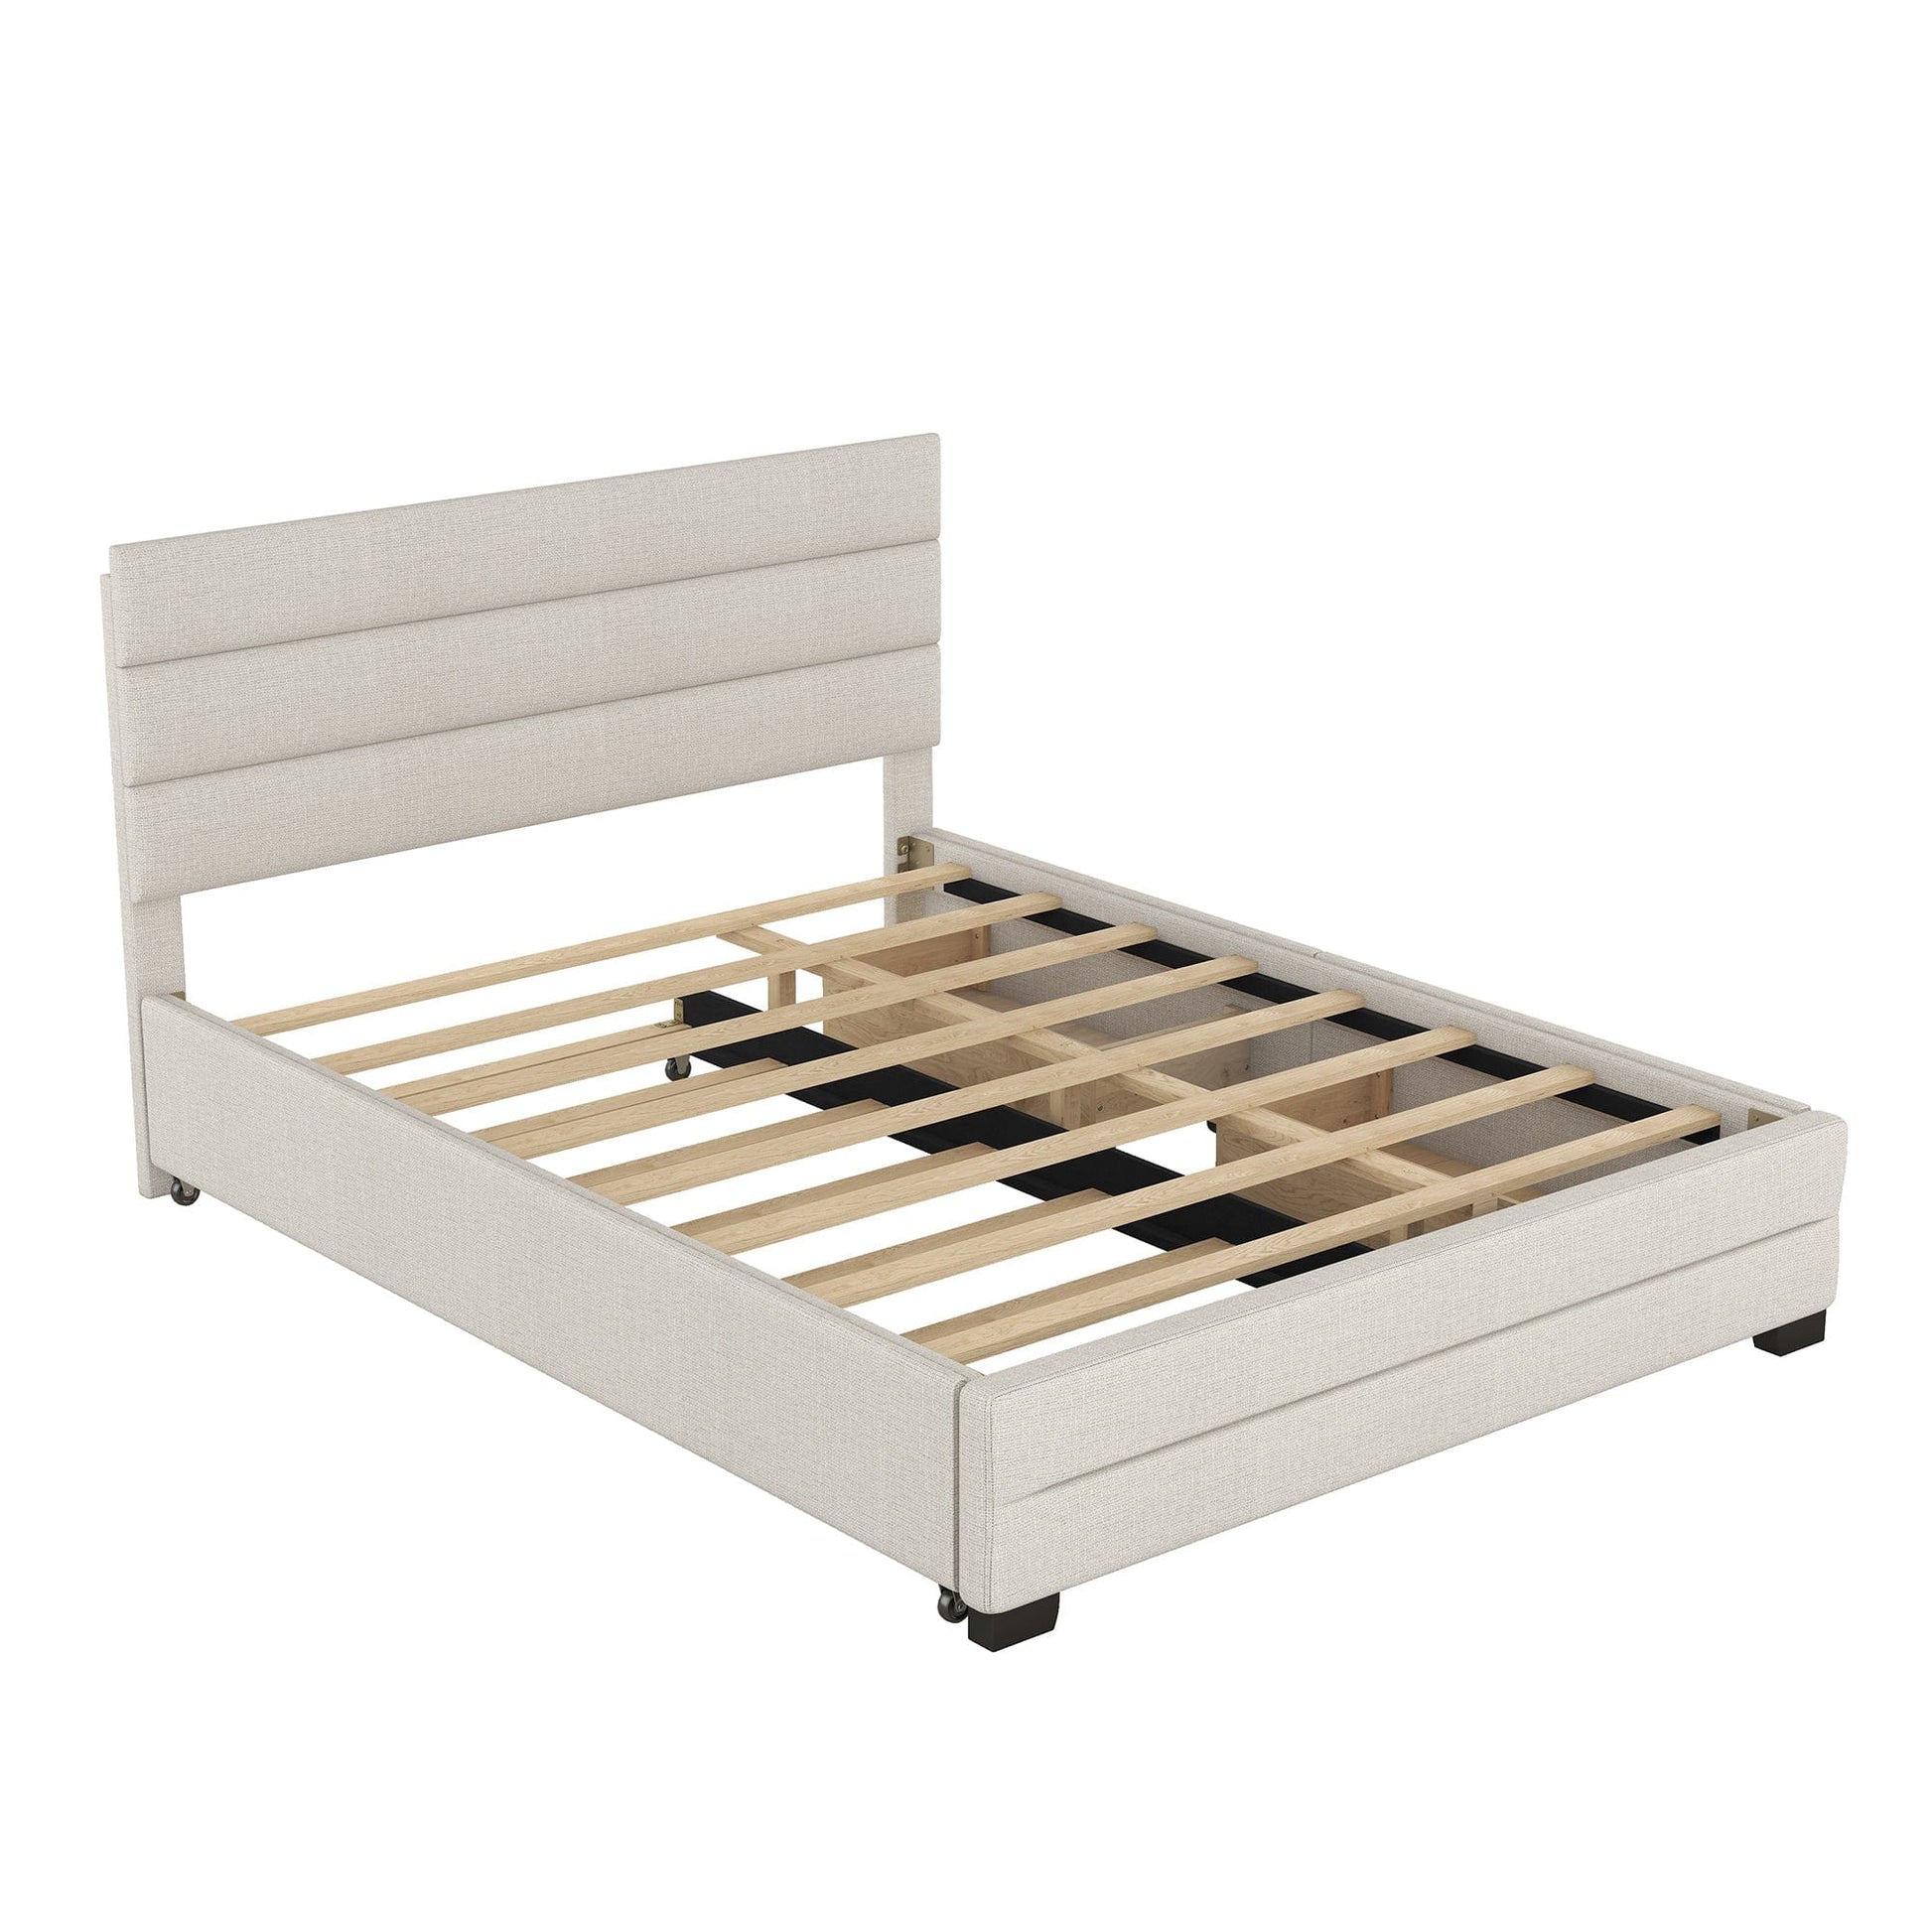 1st Choice Furniture Direct Queen Bed 1st Choice Beige Queen Platform Bed with Trundle and 2 Drawers